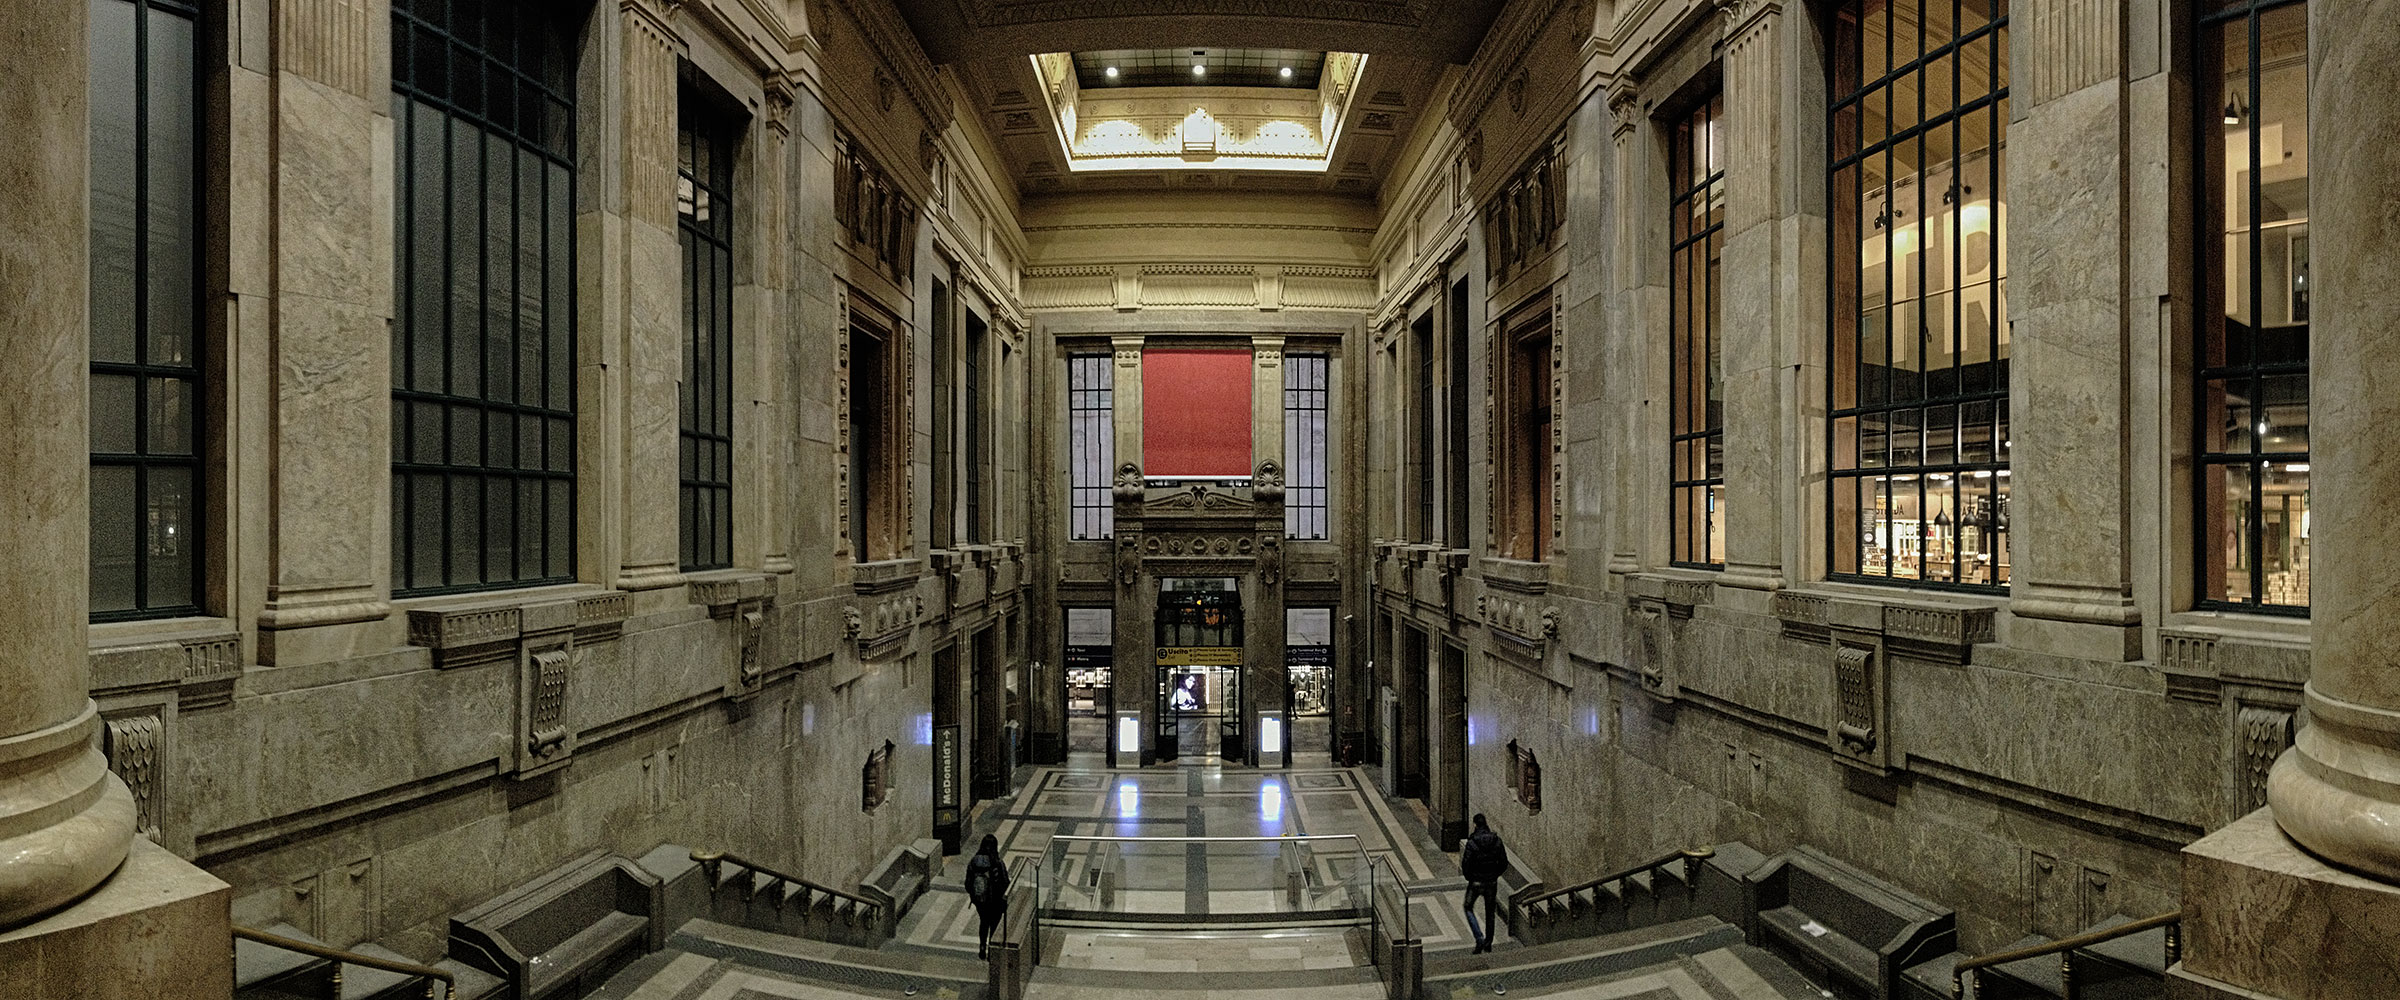 PANORAMA DIARY | Iphoneography blog | Milano Centrale building